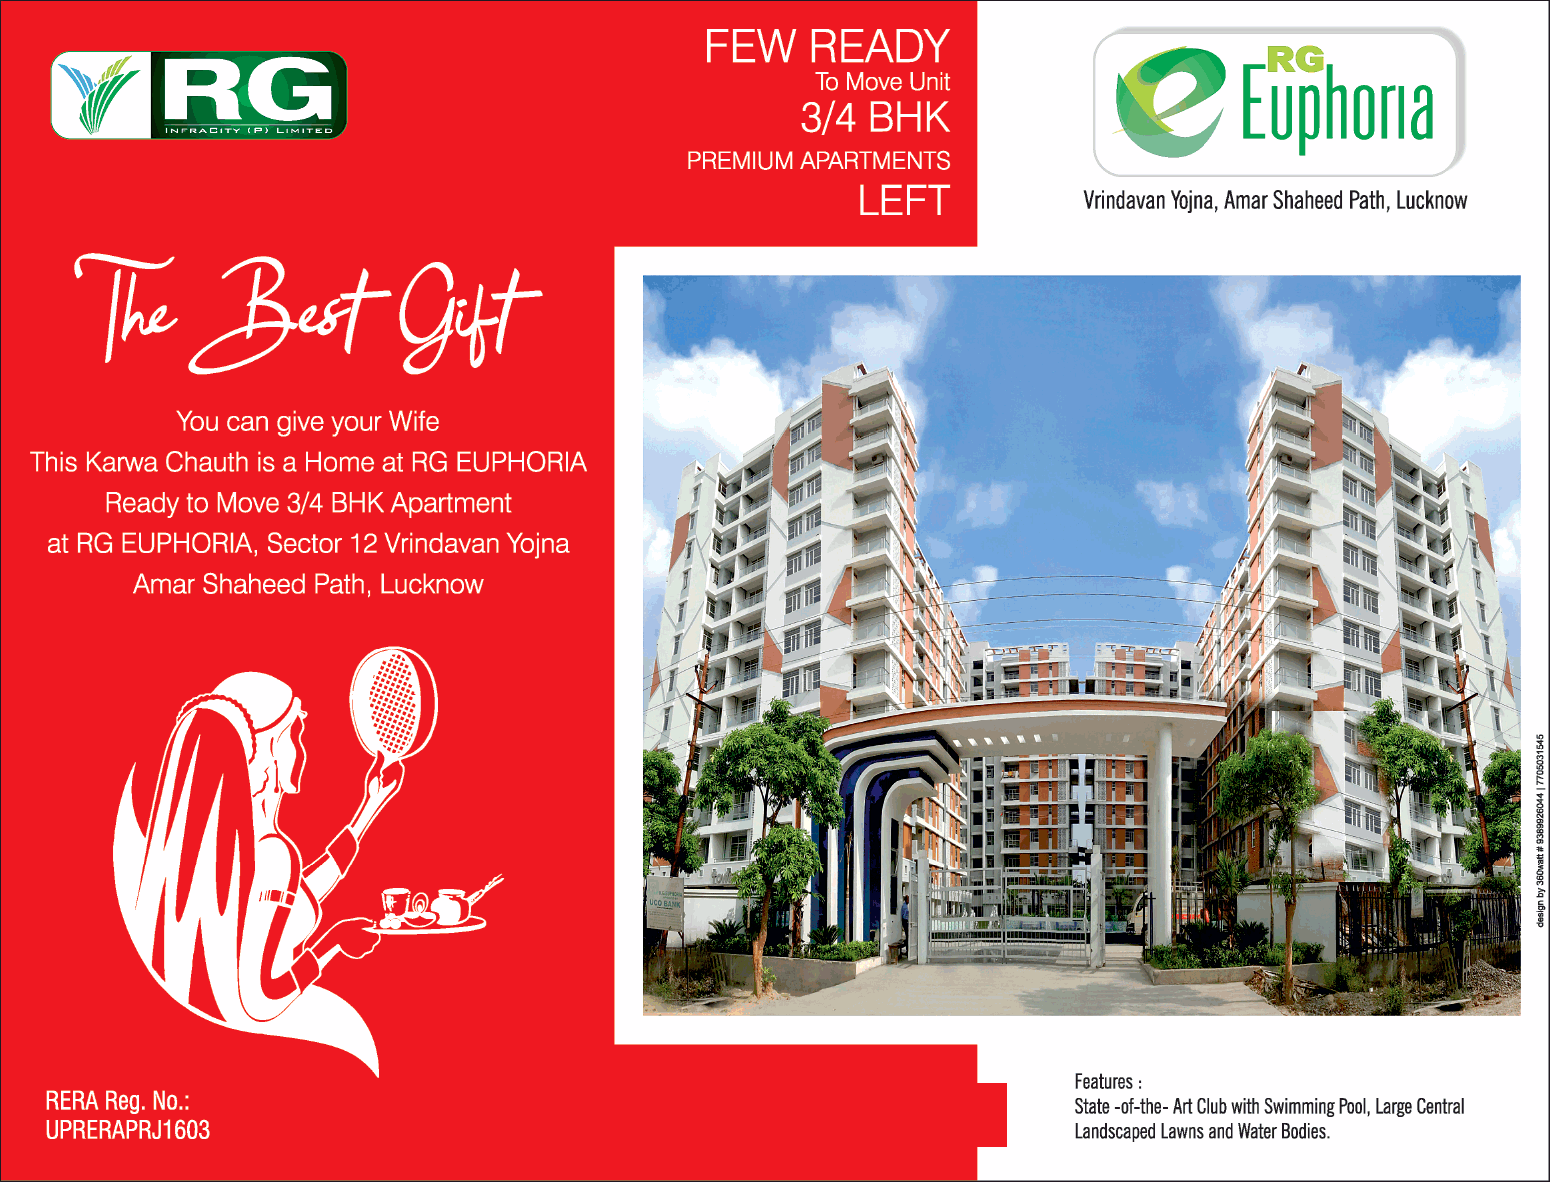 Ready to move 3/4 bhk apartments at RG Euphoria in Sector 12 Vrindavan Yojna, Lucknow Update